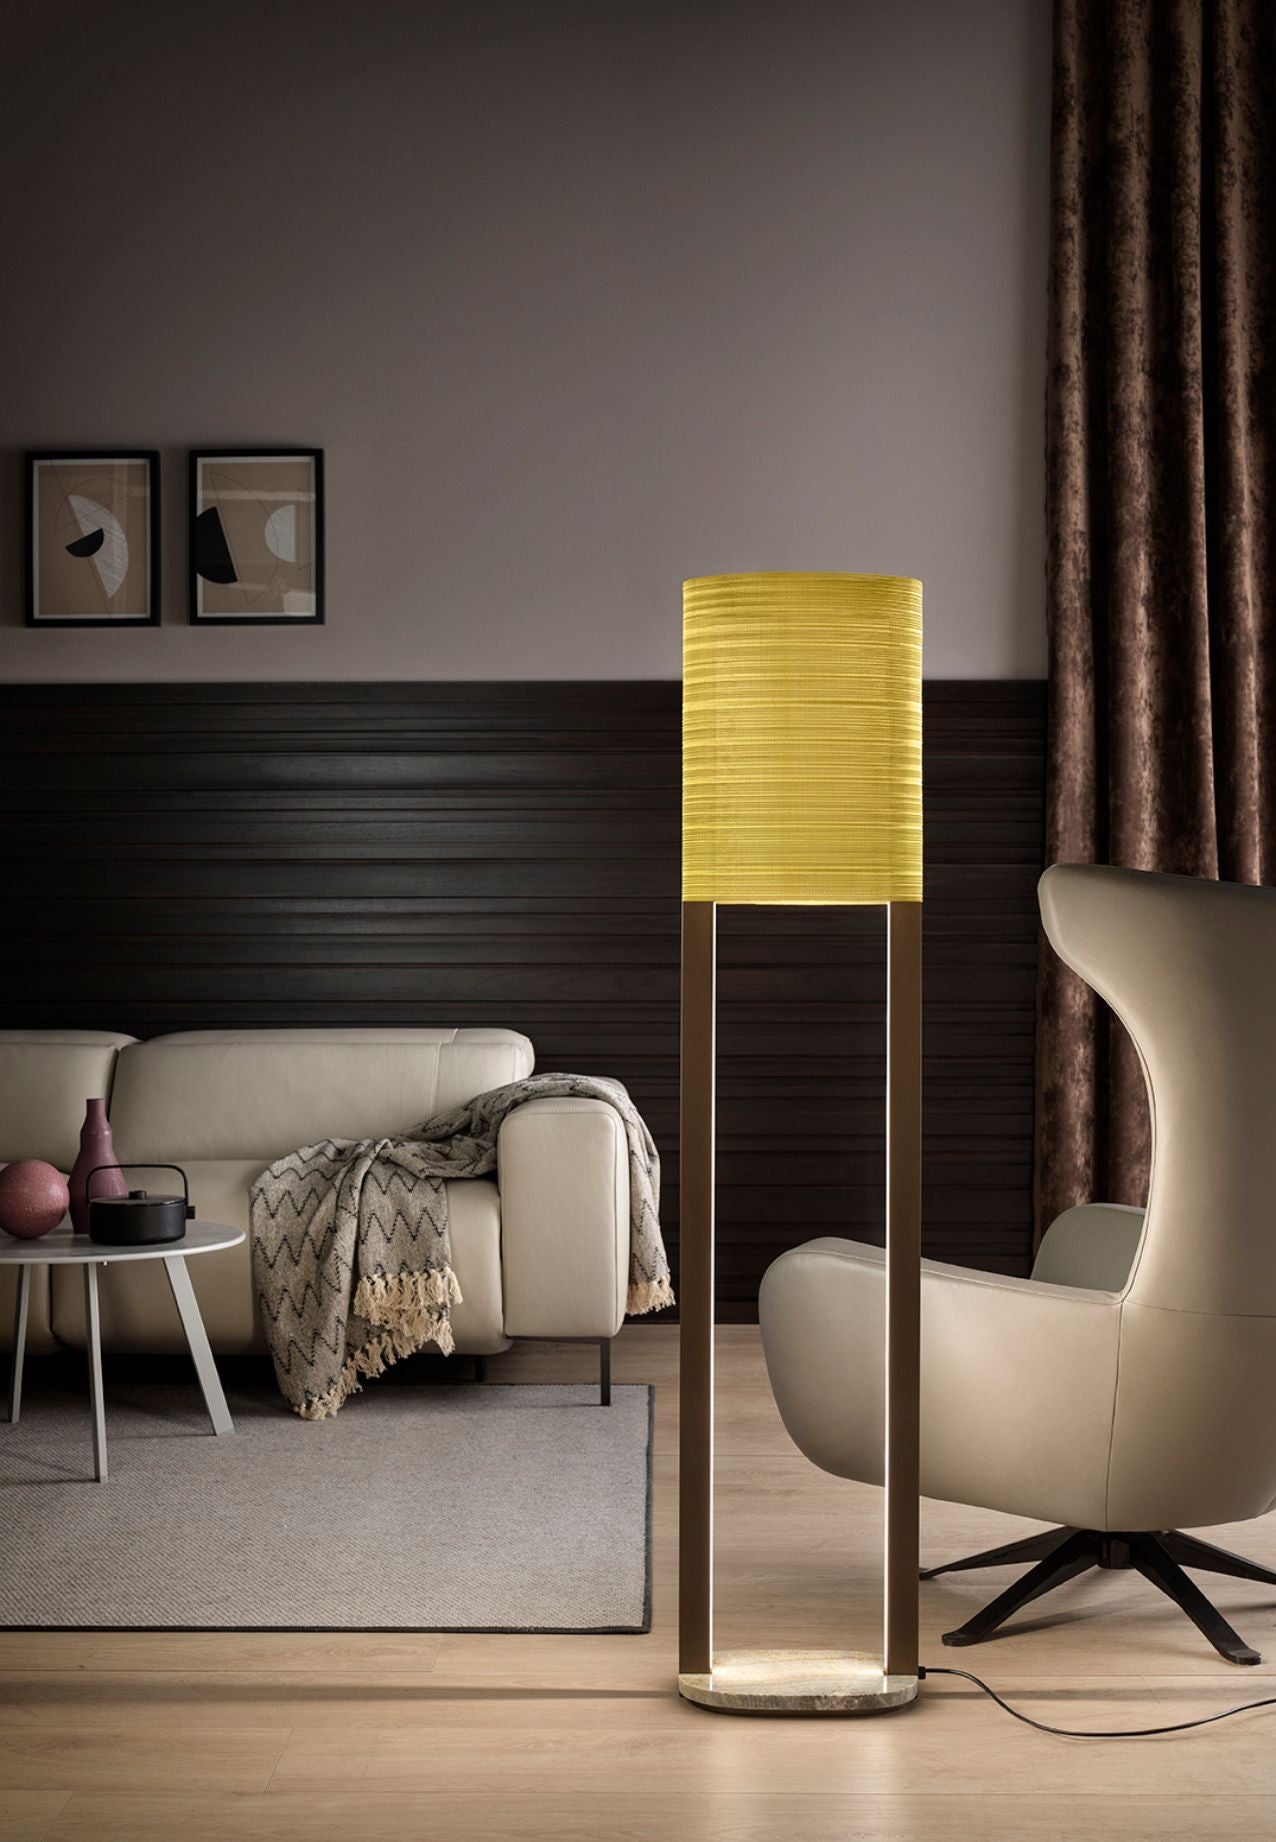 Ebe Floor Lamp by Masiero from Luxury Decorative Lighting Collection at Spacio India